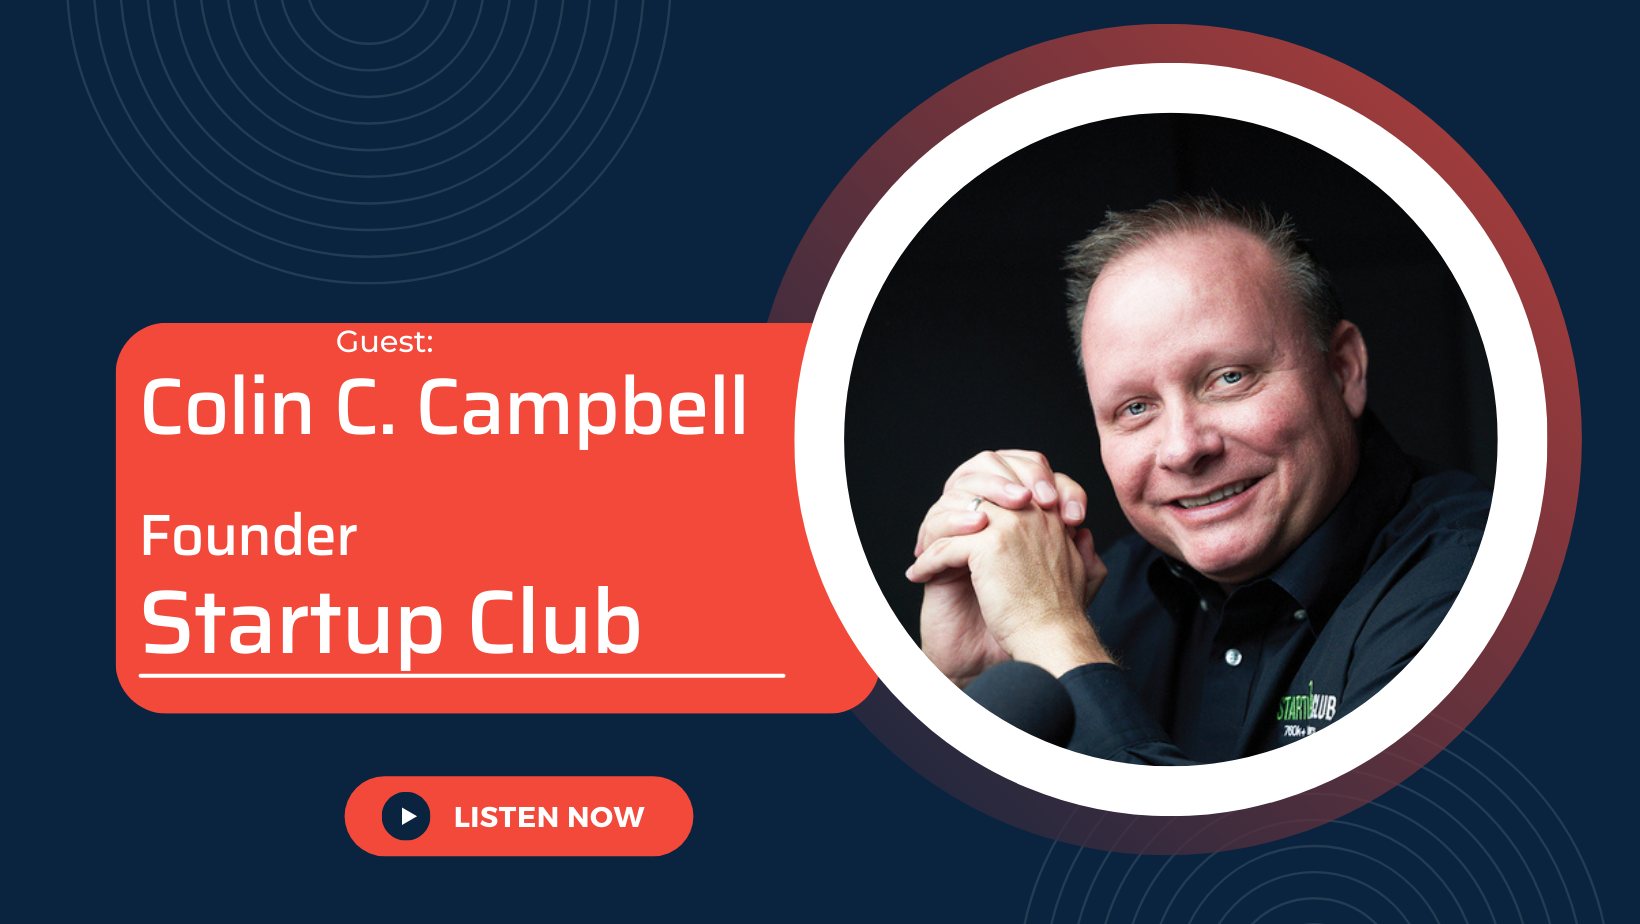 How To Grow Your Startup With the Founder of Startup Club, Colin C. Campbell